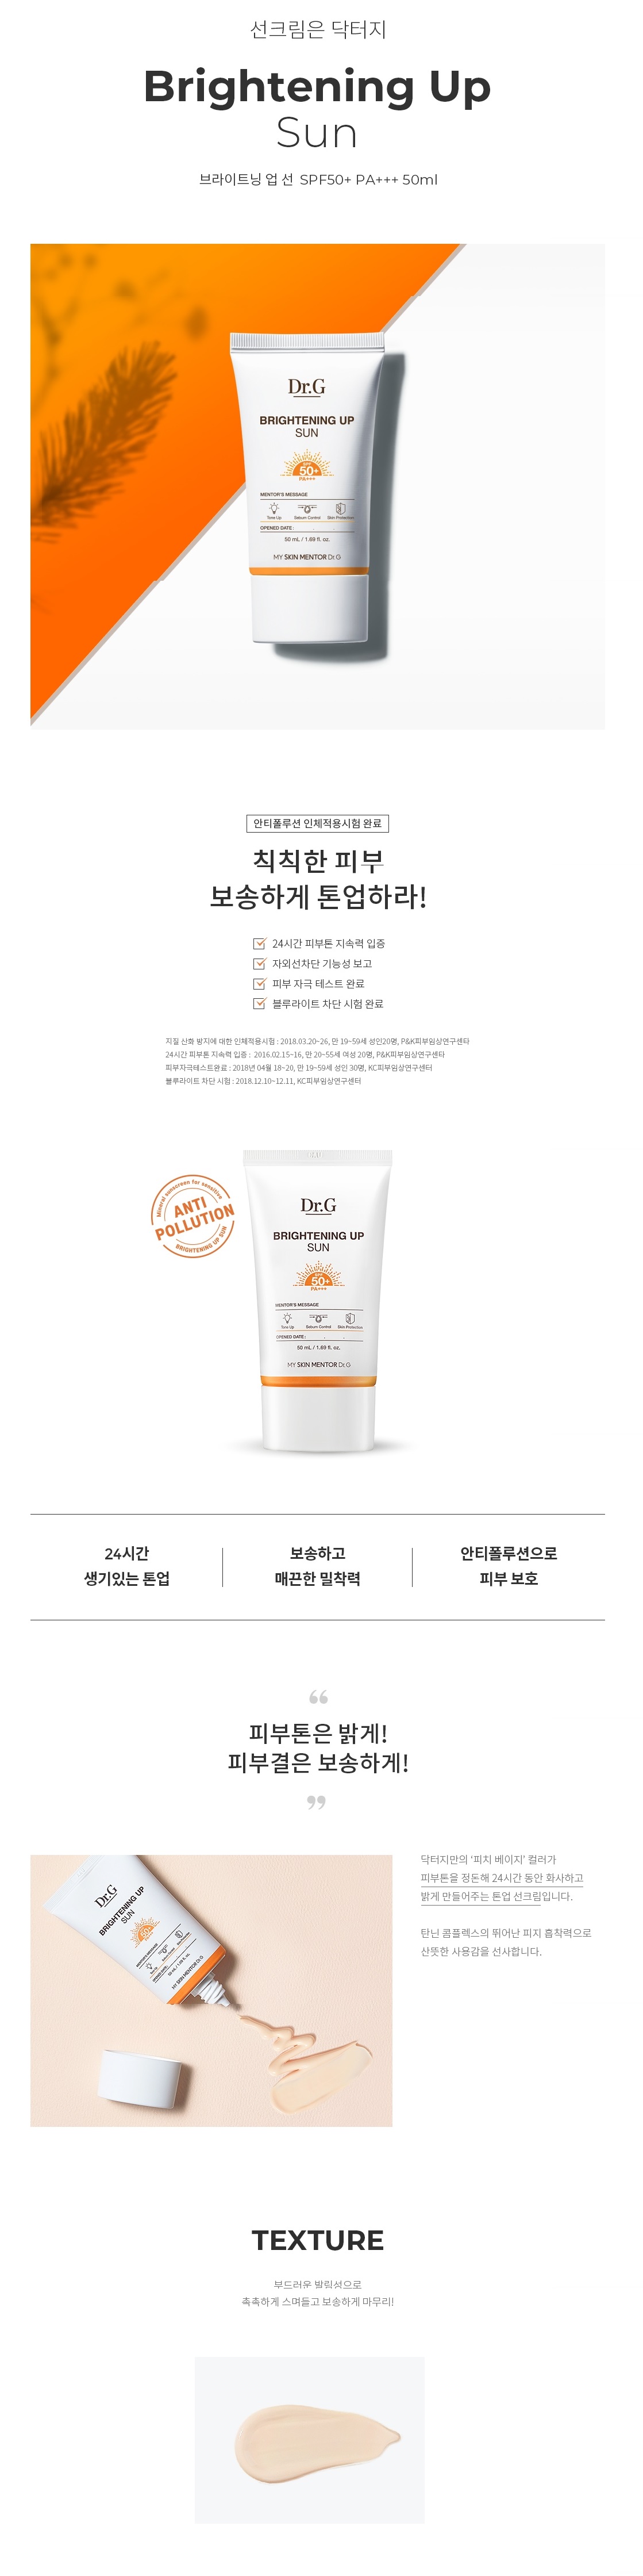 Brightening Up Sun SPF50+ PA+++ 50ml How to Use Description Ingredients